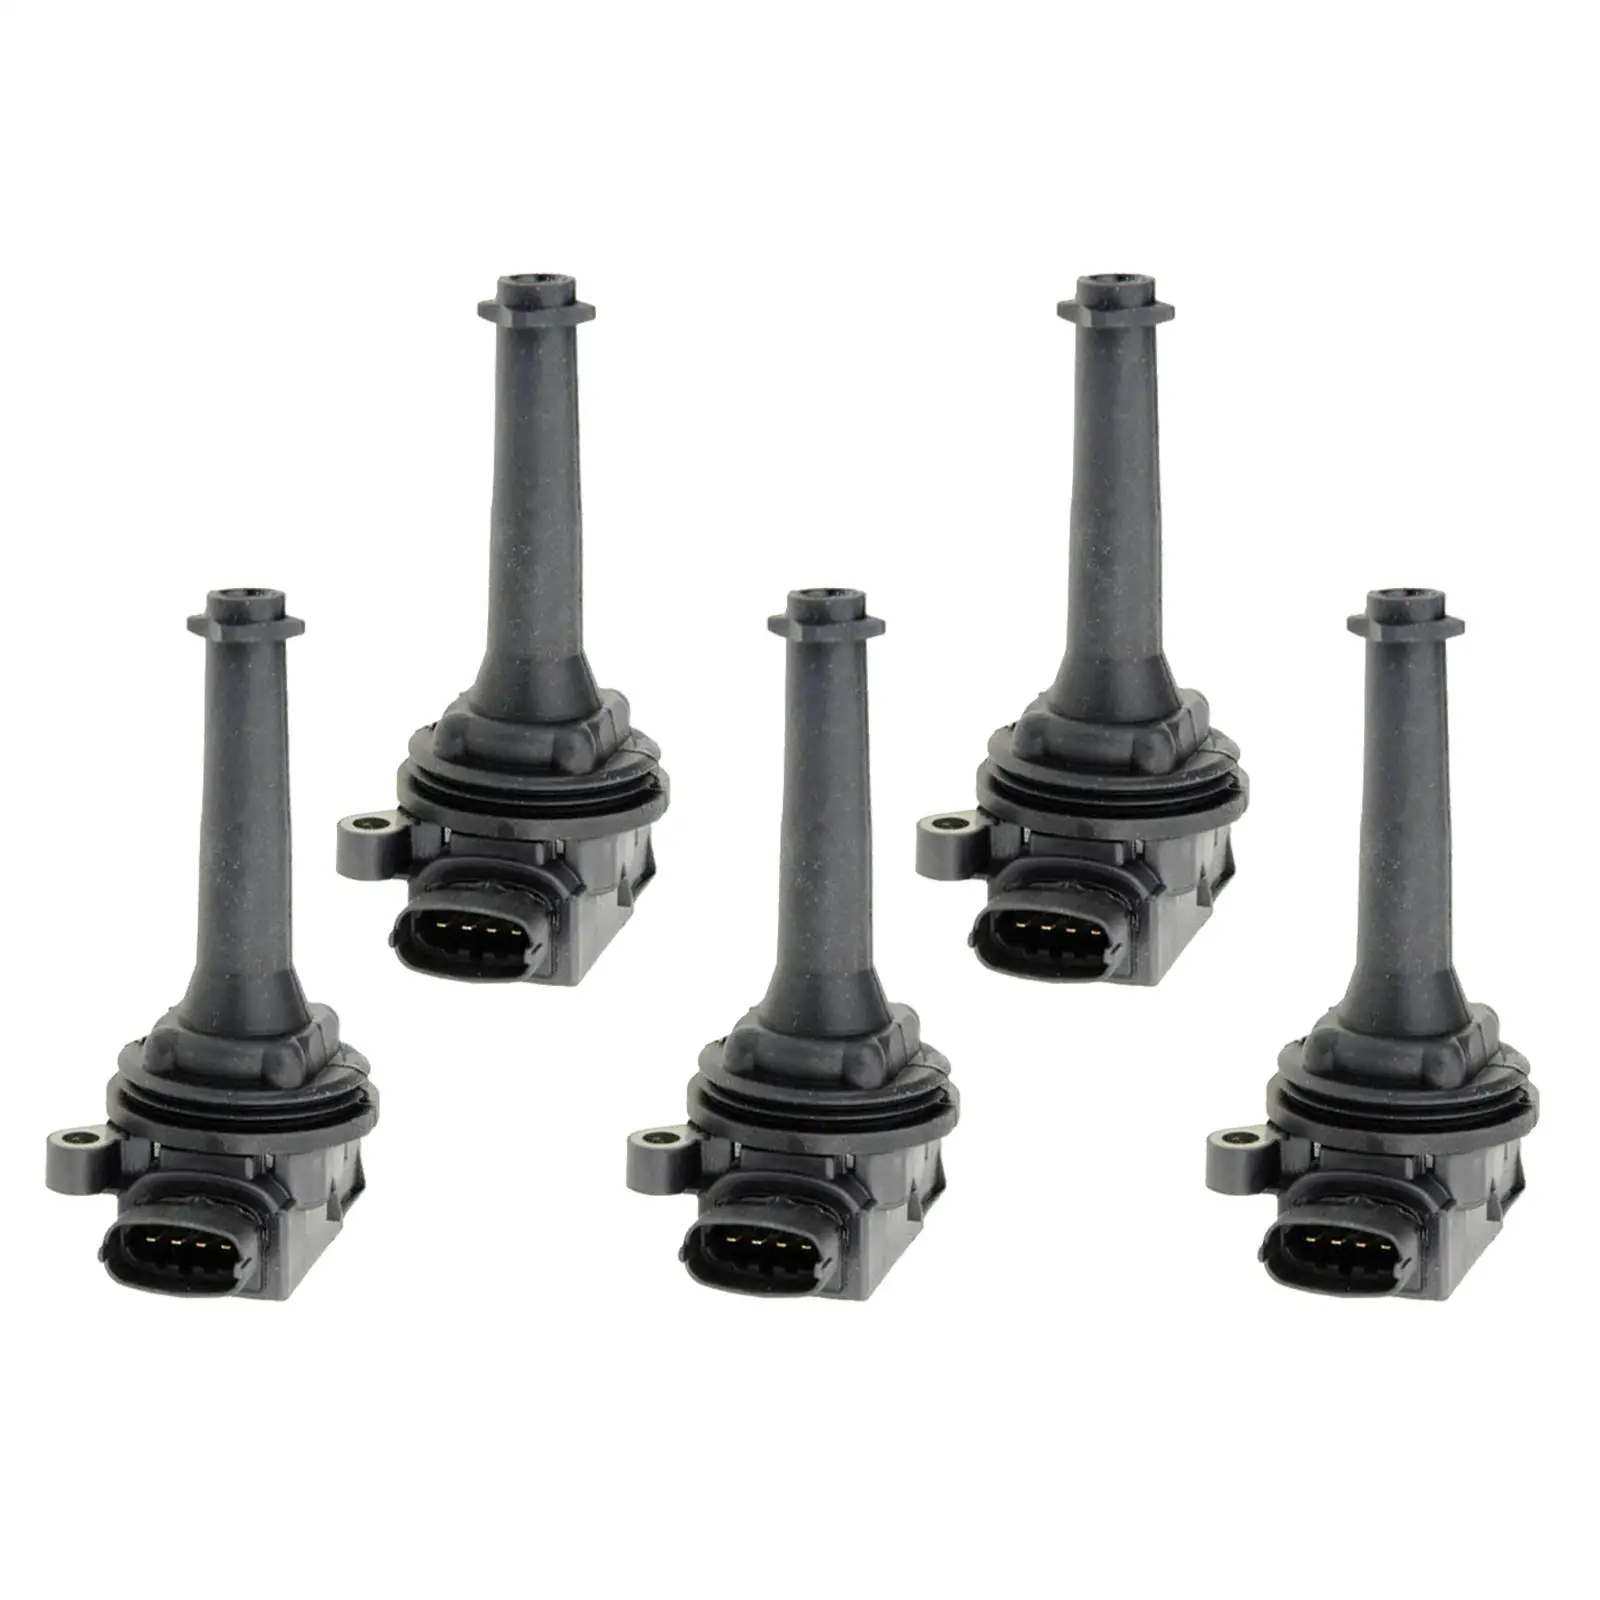 MAS Ignition Coils Pack Replacement for Volvo V70 C70 S60 S70 XC70 XC90 L5 2.3L 2.4L 2.5L C1258 UF341 